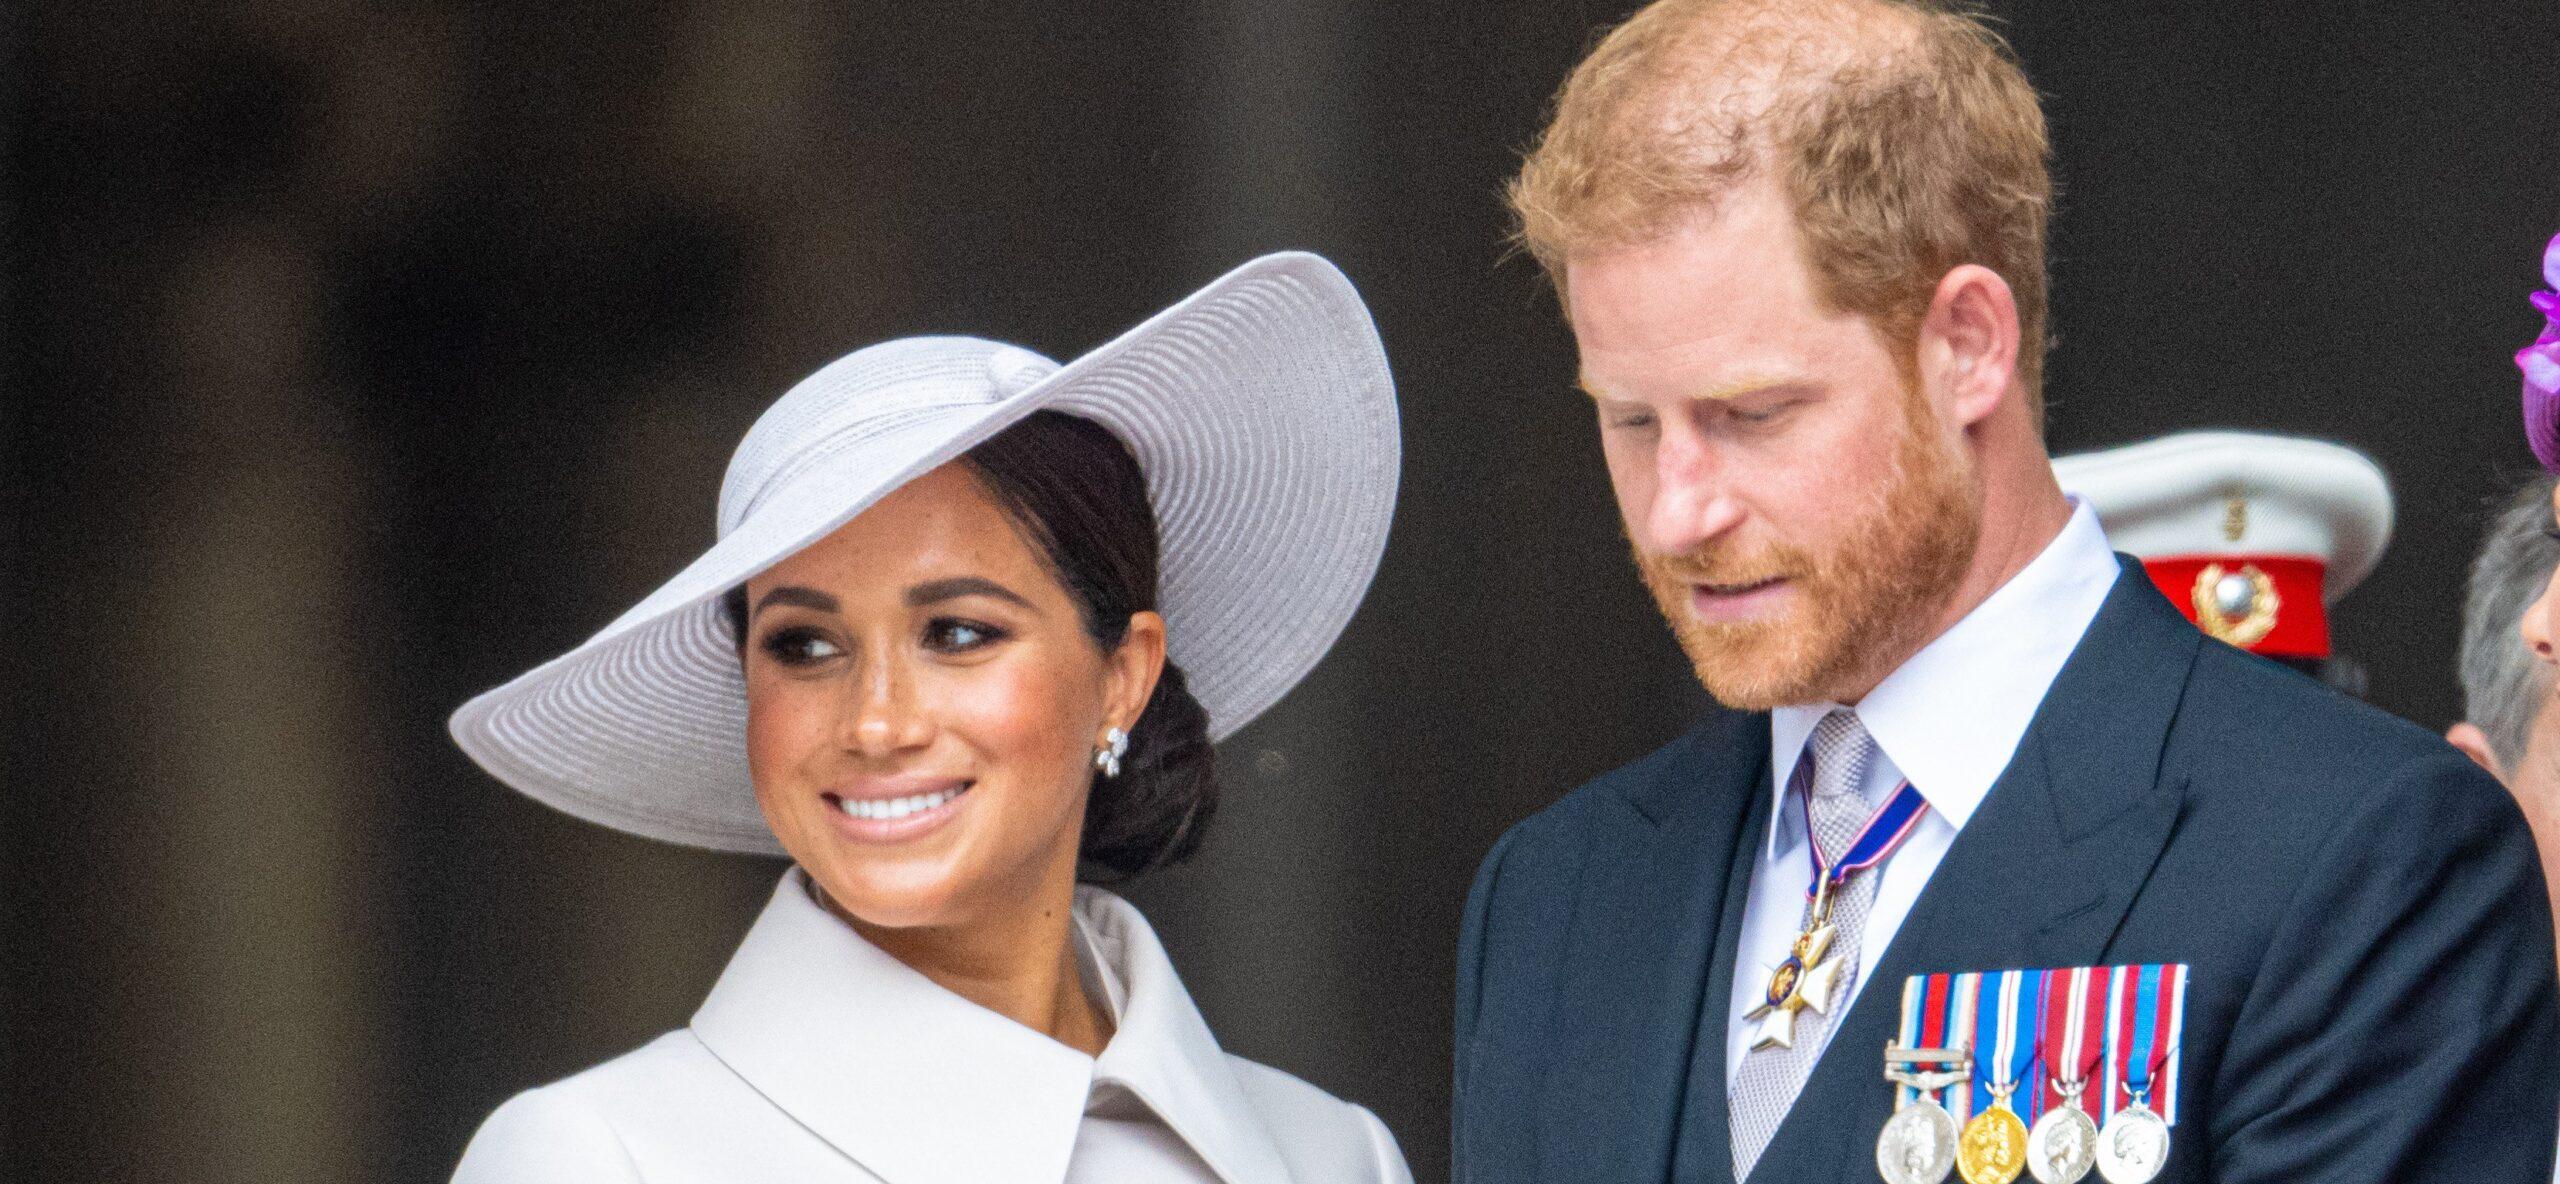 Queen Elizabeth's Friend BASHES Meghan Markle For Joining Royal Family